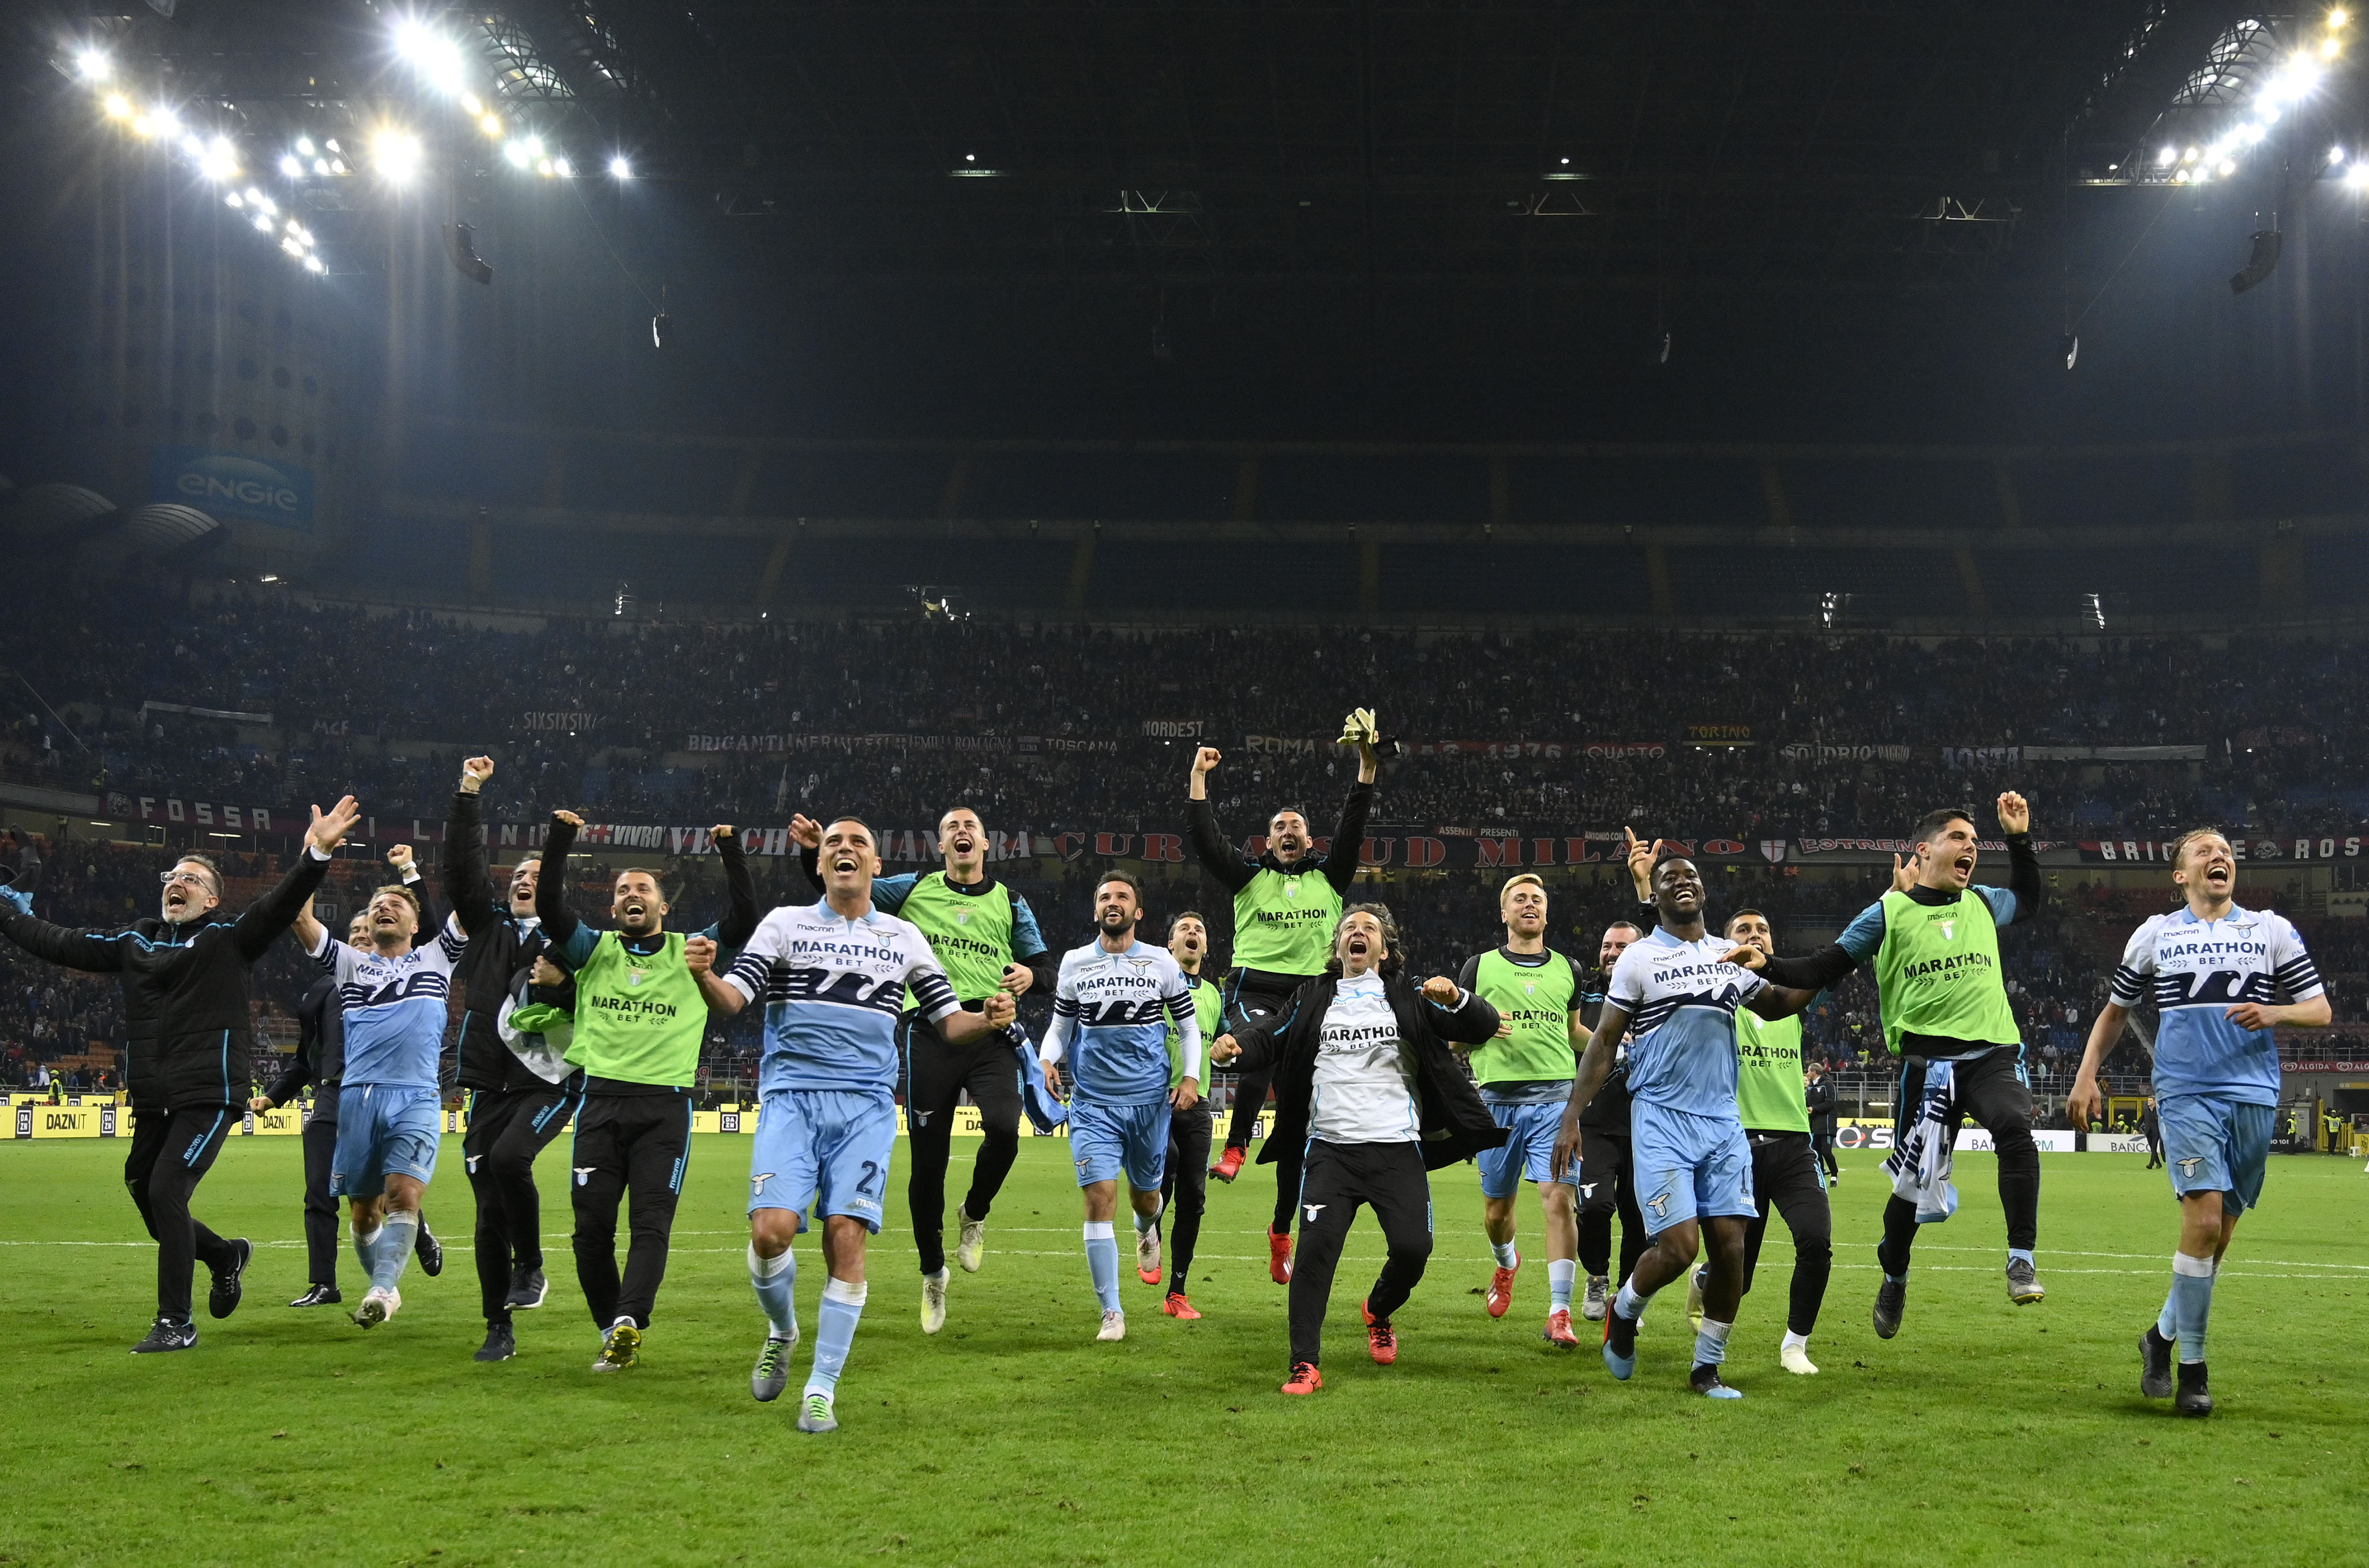 MILAN, ITALY - APRIL 24: SS Lazio player celebrates their victory after the TIM Cup match between AC Milan and SS Lazio at Stadio Giuseppe Meazza on April 24, 2019 in Milan, Italy. (Photo by Marco Rosi/Getty Images)